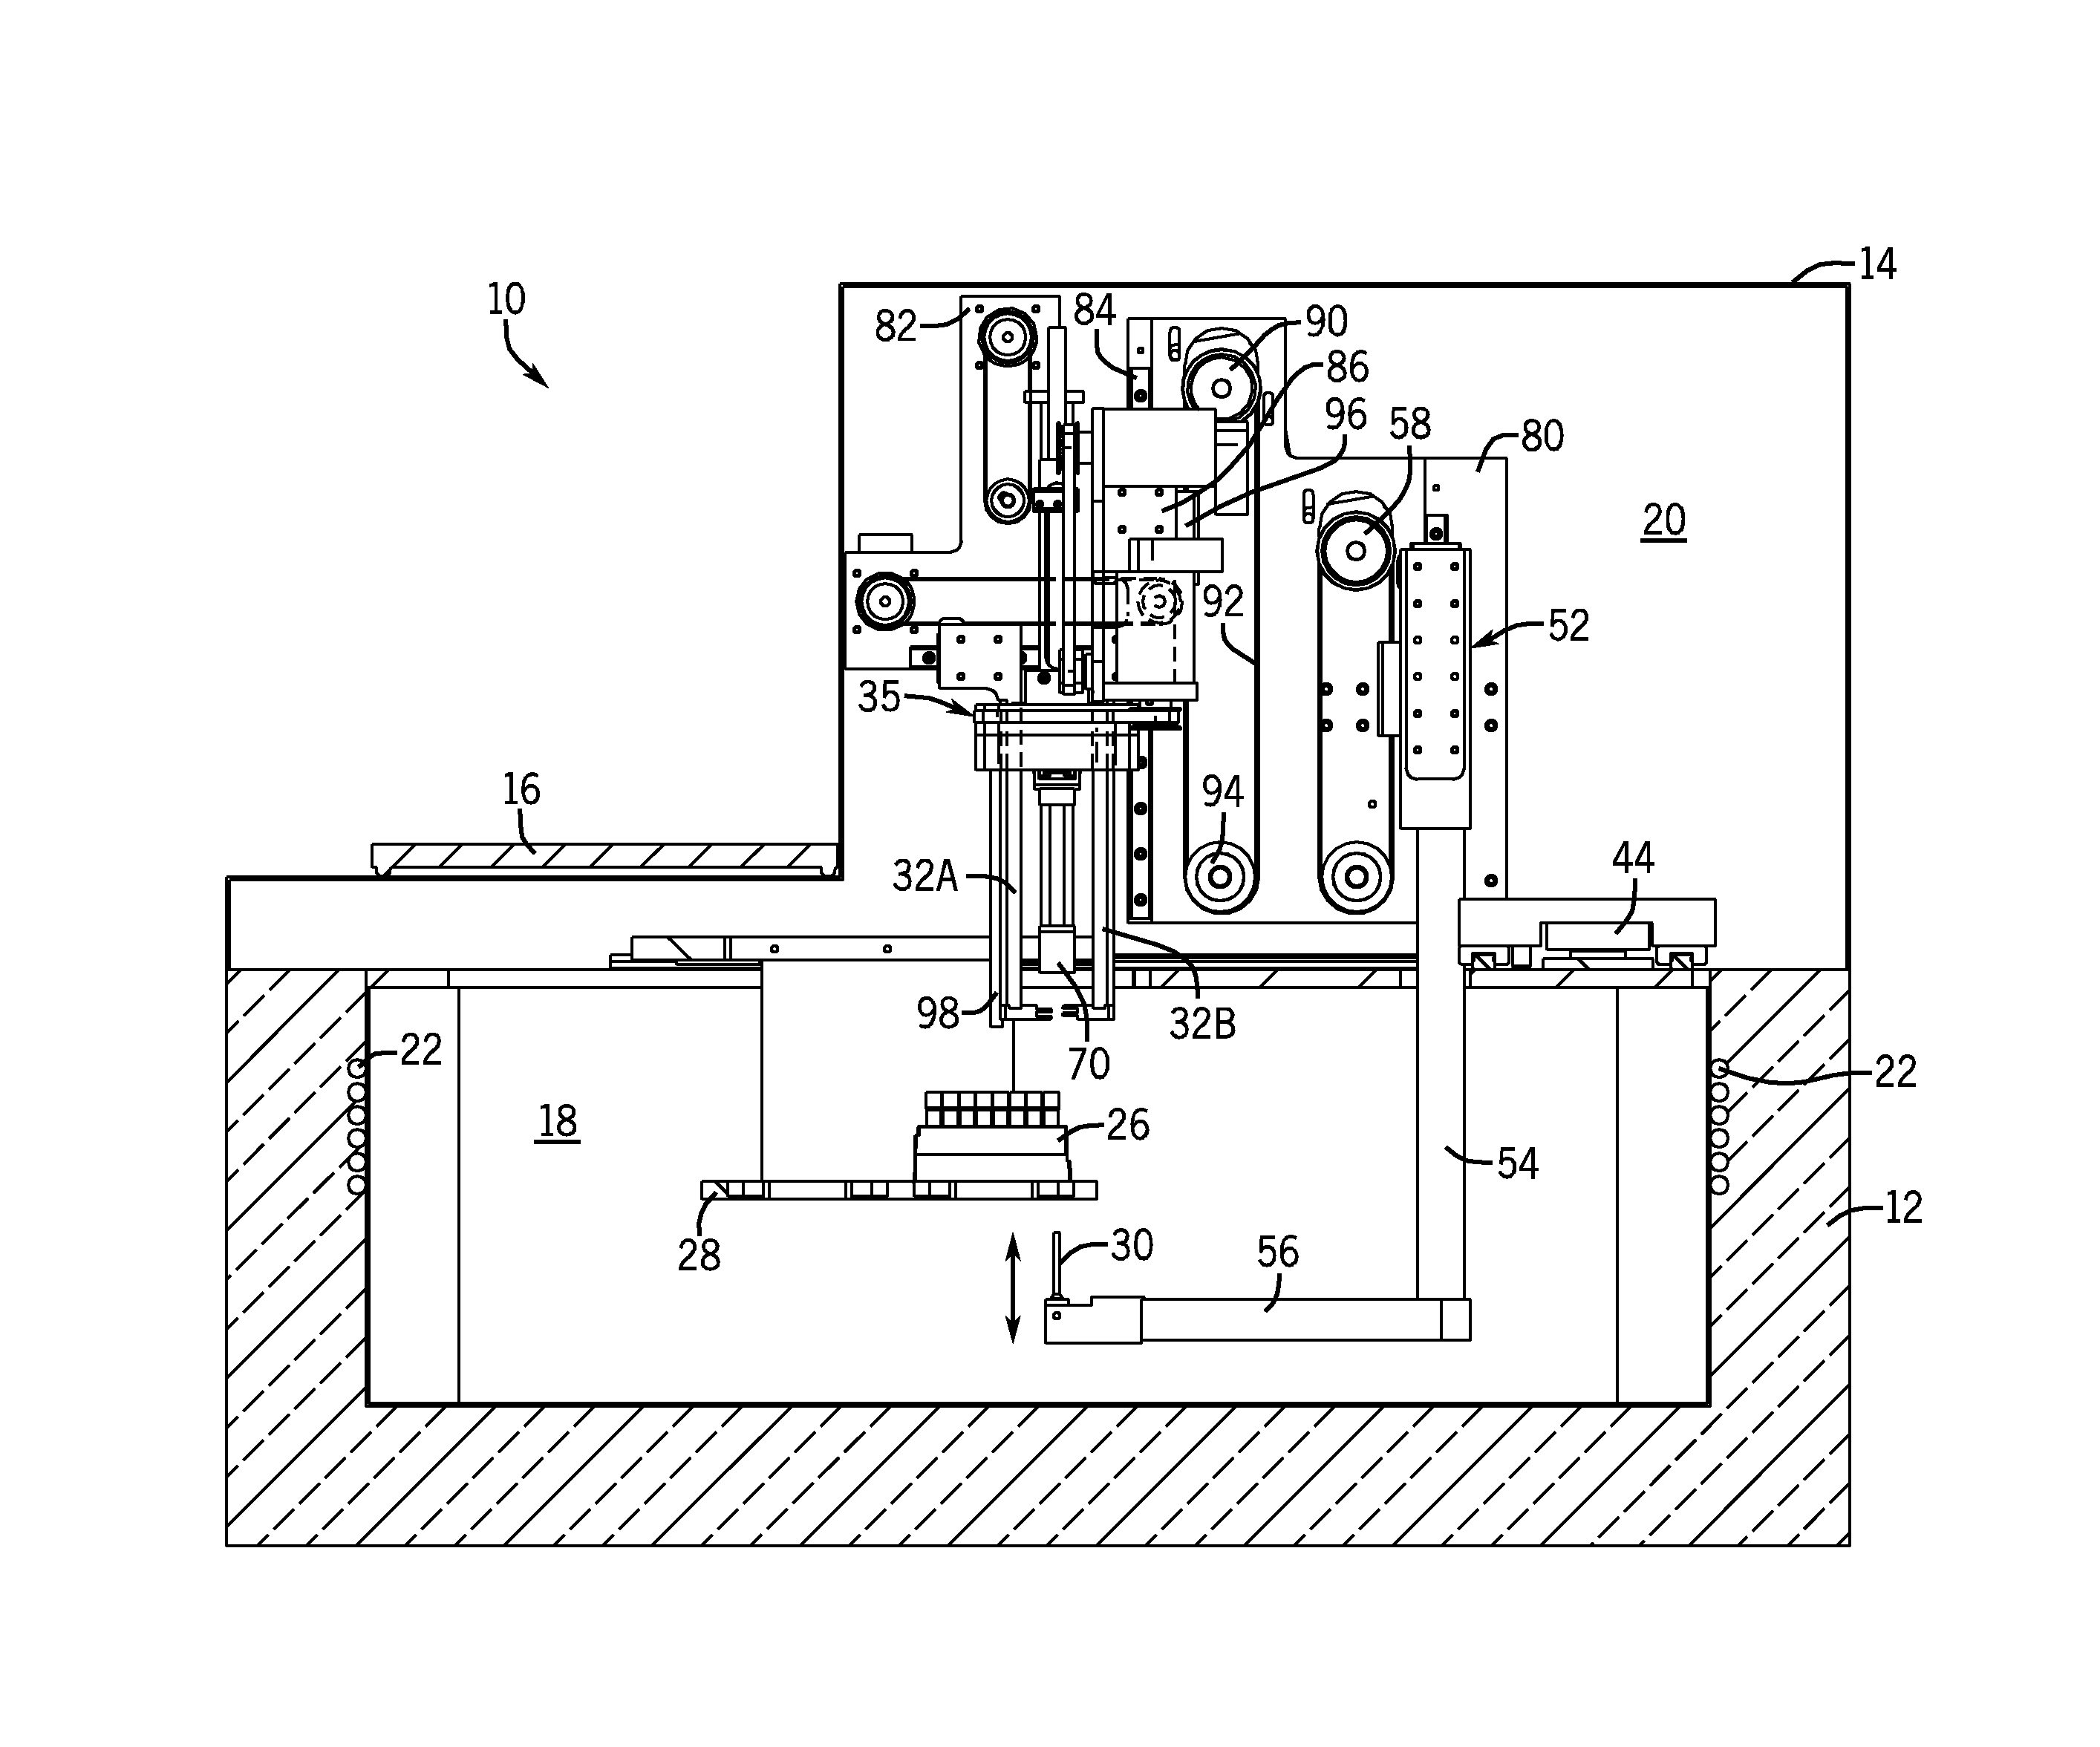 Tube picking mechanisms with an ultra-low temperature or cryogenic picking compartment